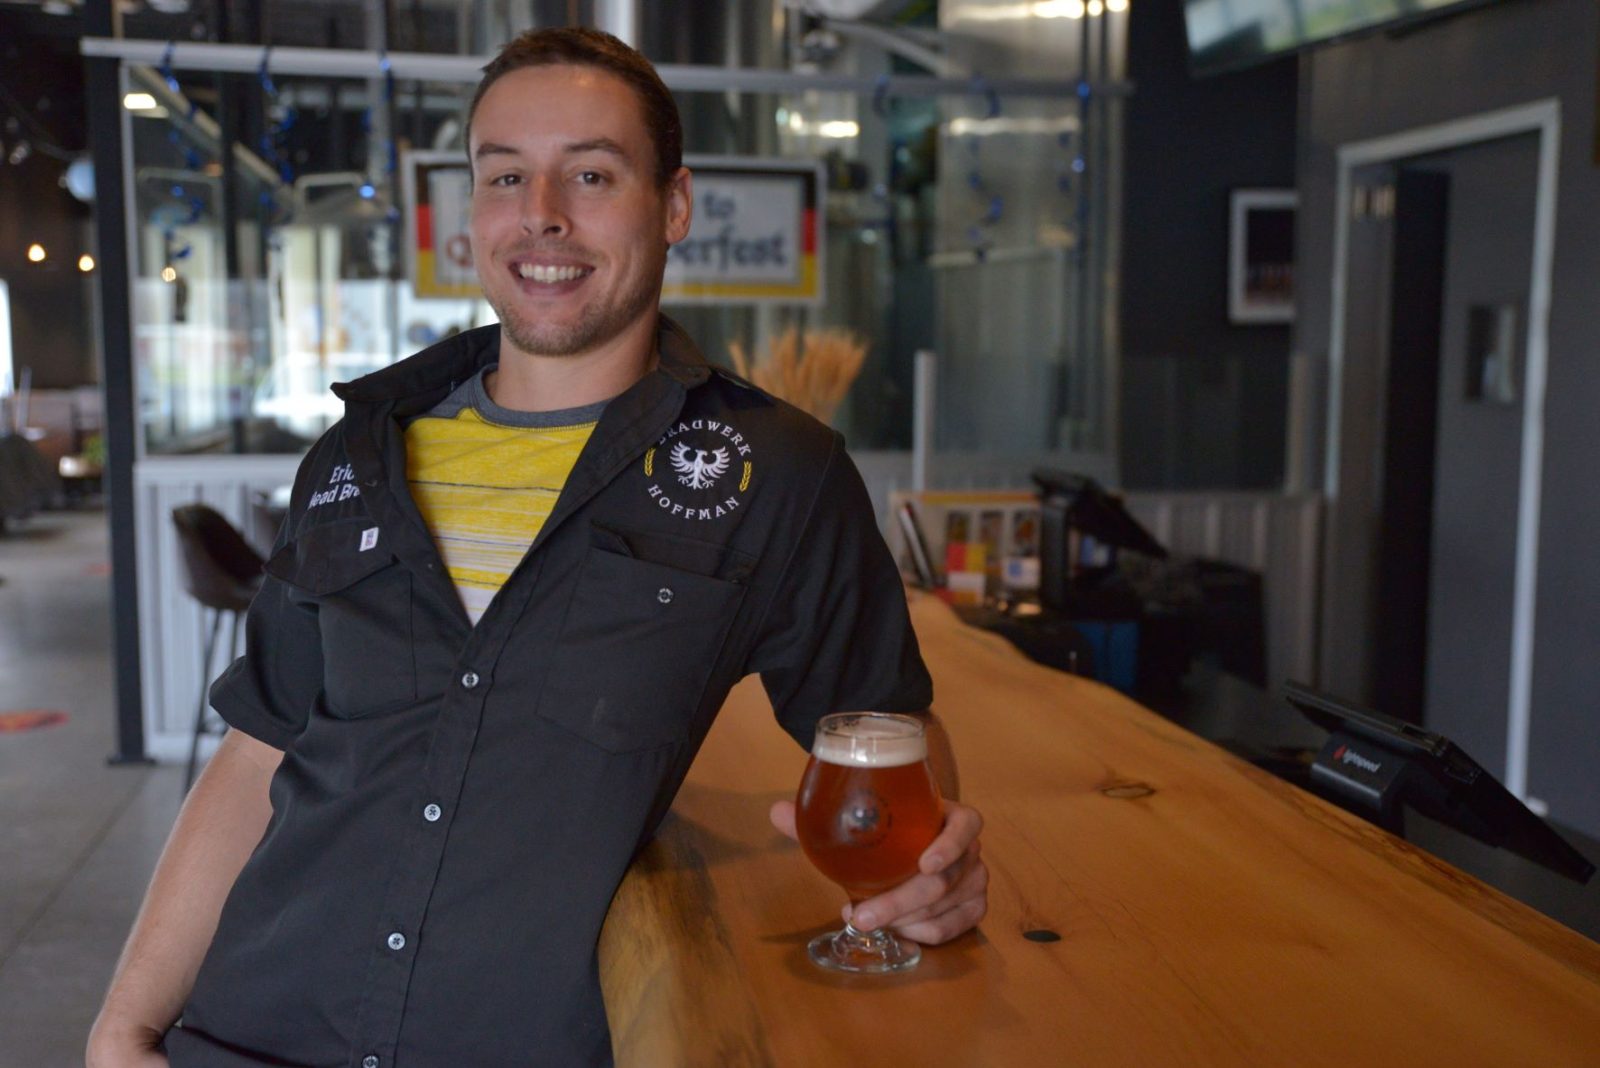 Hopping Happy: Rockland Brewery Wins Business Award